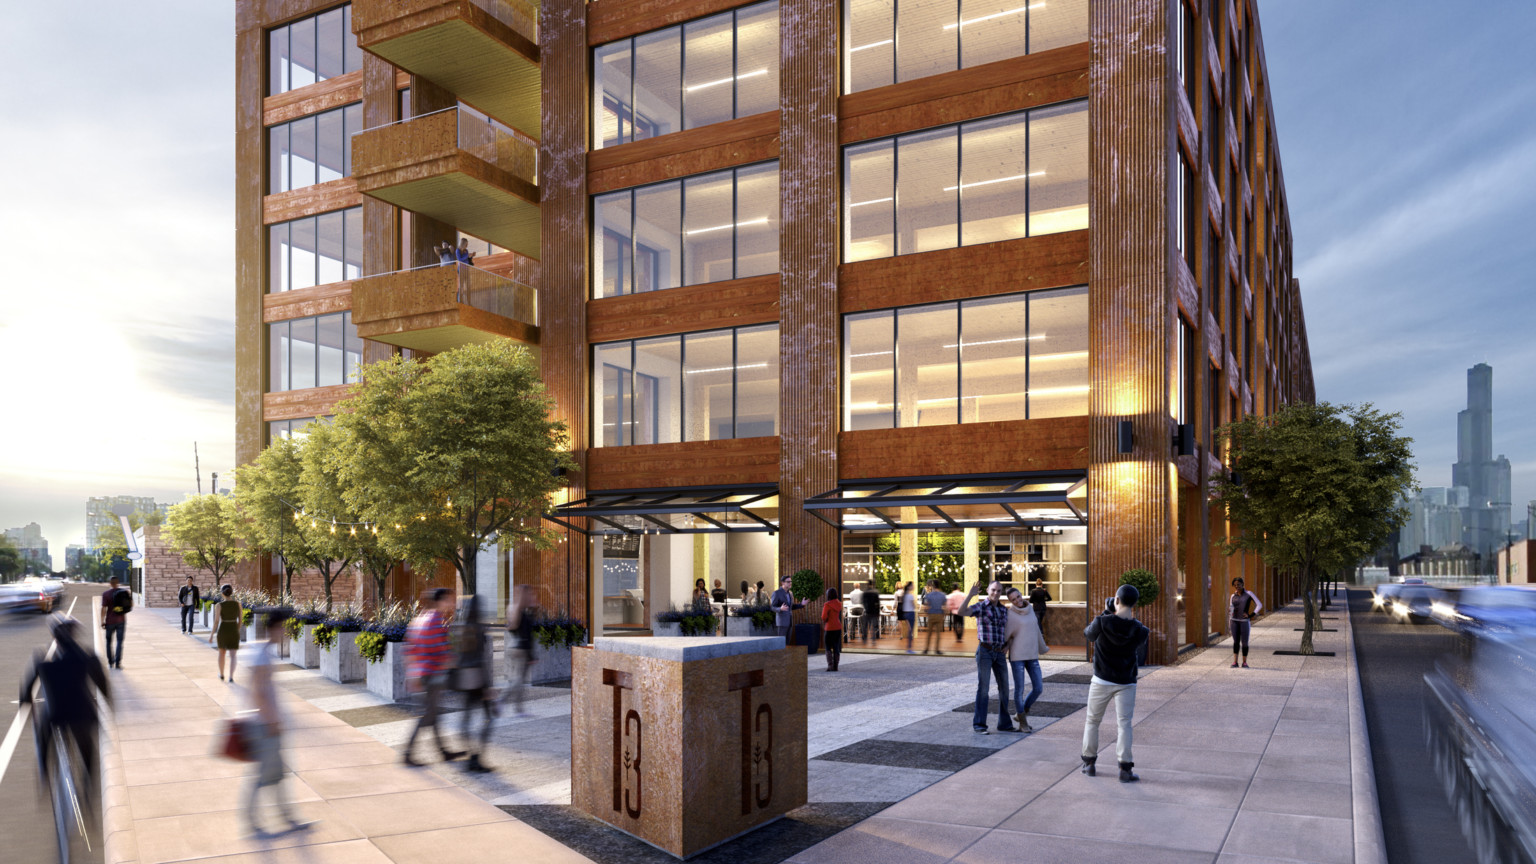 design concept for a mass timber building in chicago, warm copper exterior